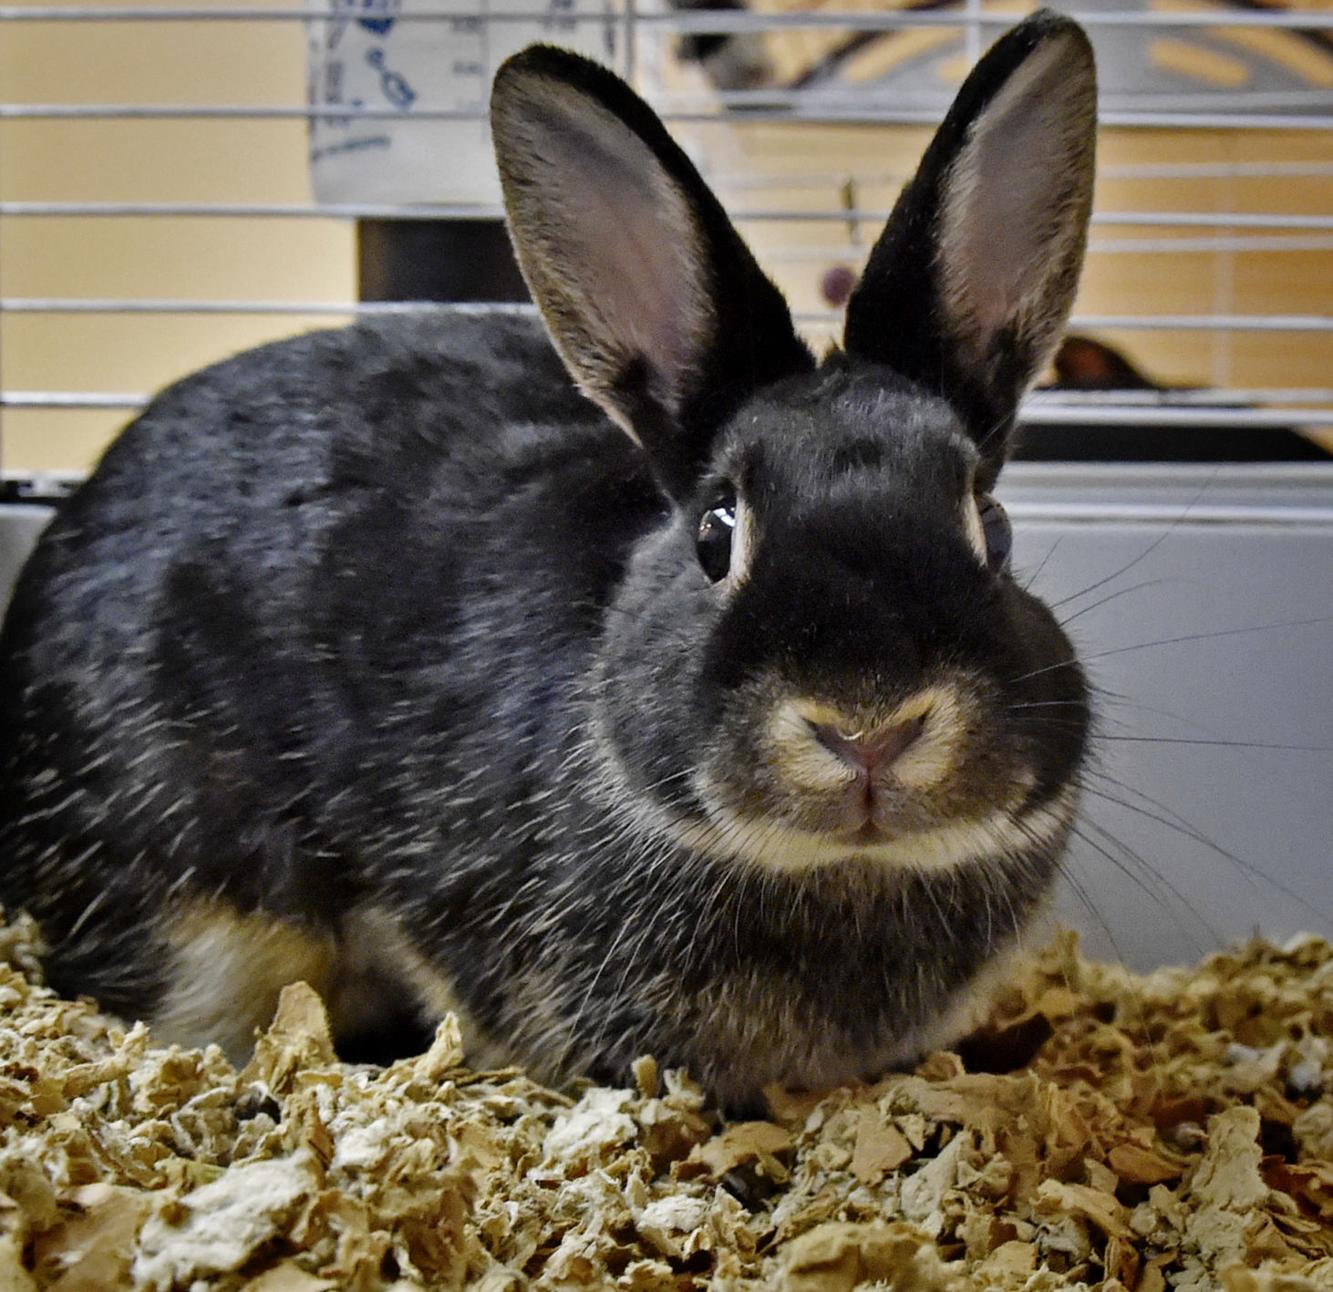 Pet of the week: Adopt Poppy, a 1-year-old rabbit | Local News ...